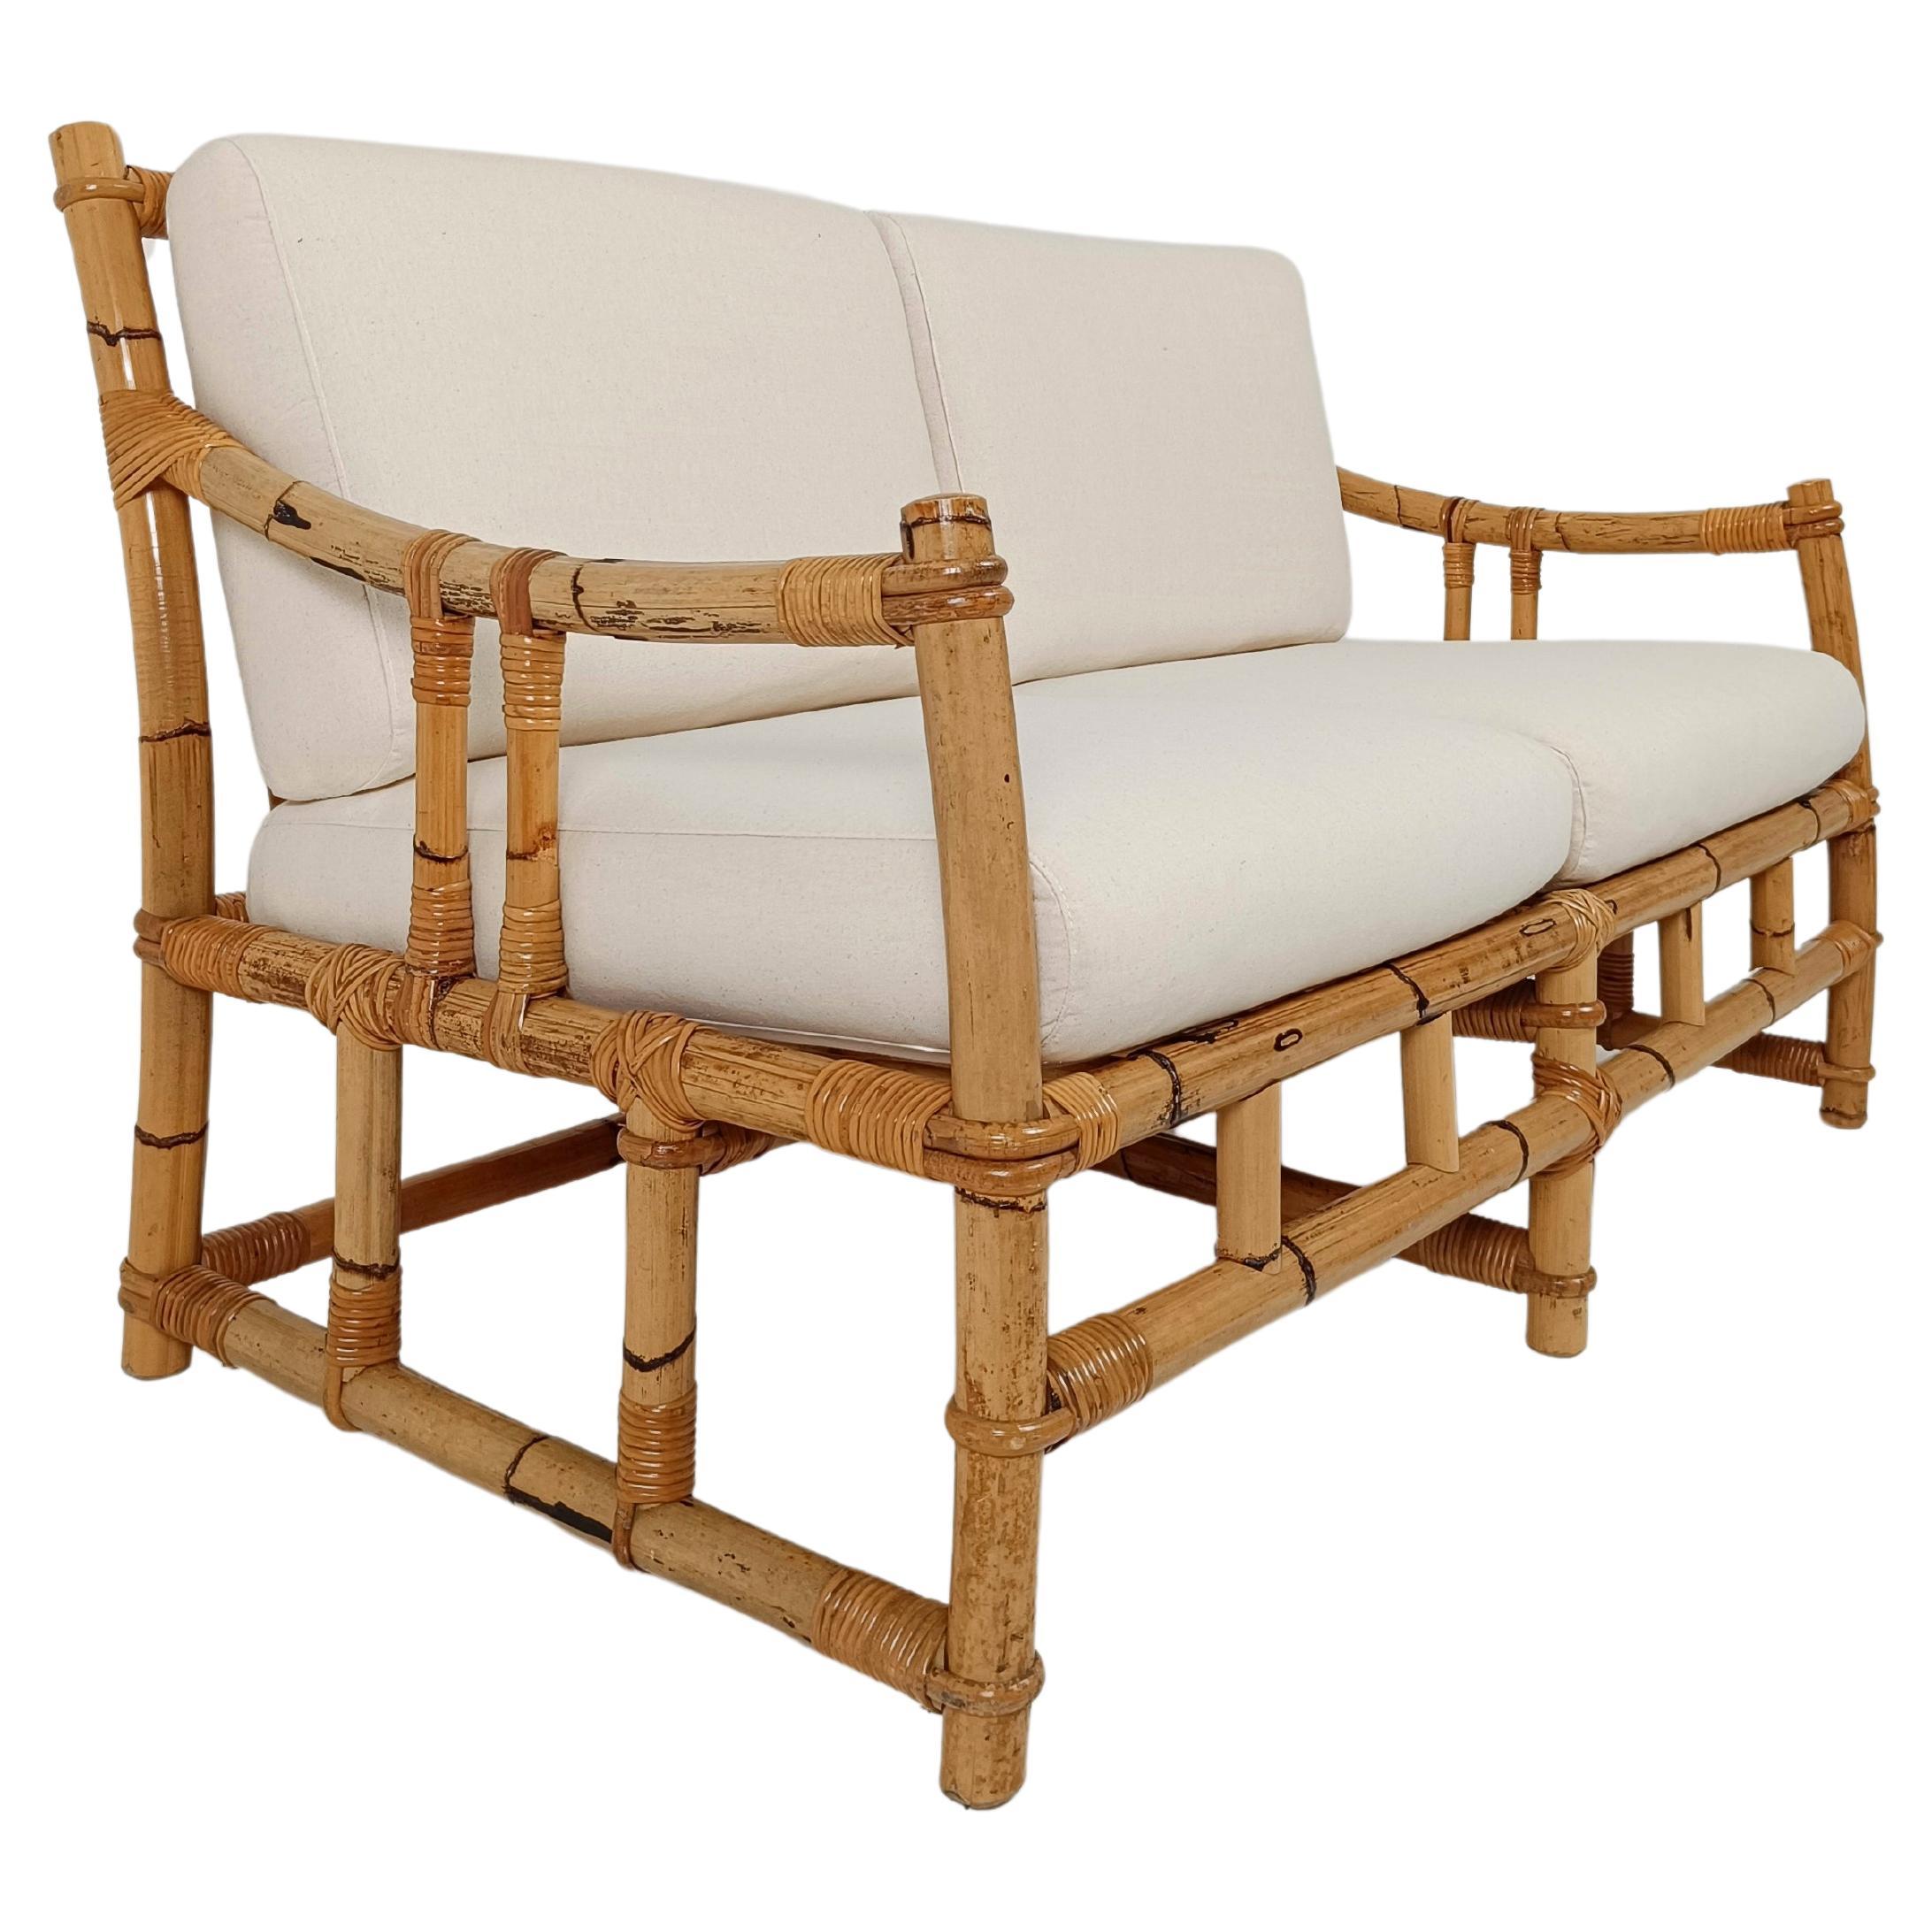 Italian two-seater Sofa in Bamboo, Rattan and Cane By Vivai Del Sud, Italy 60s 